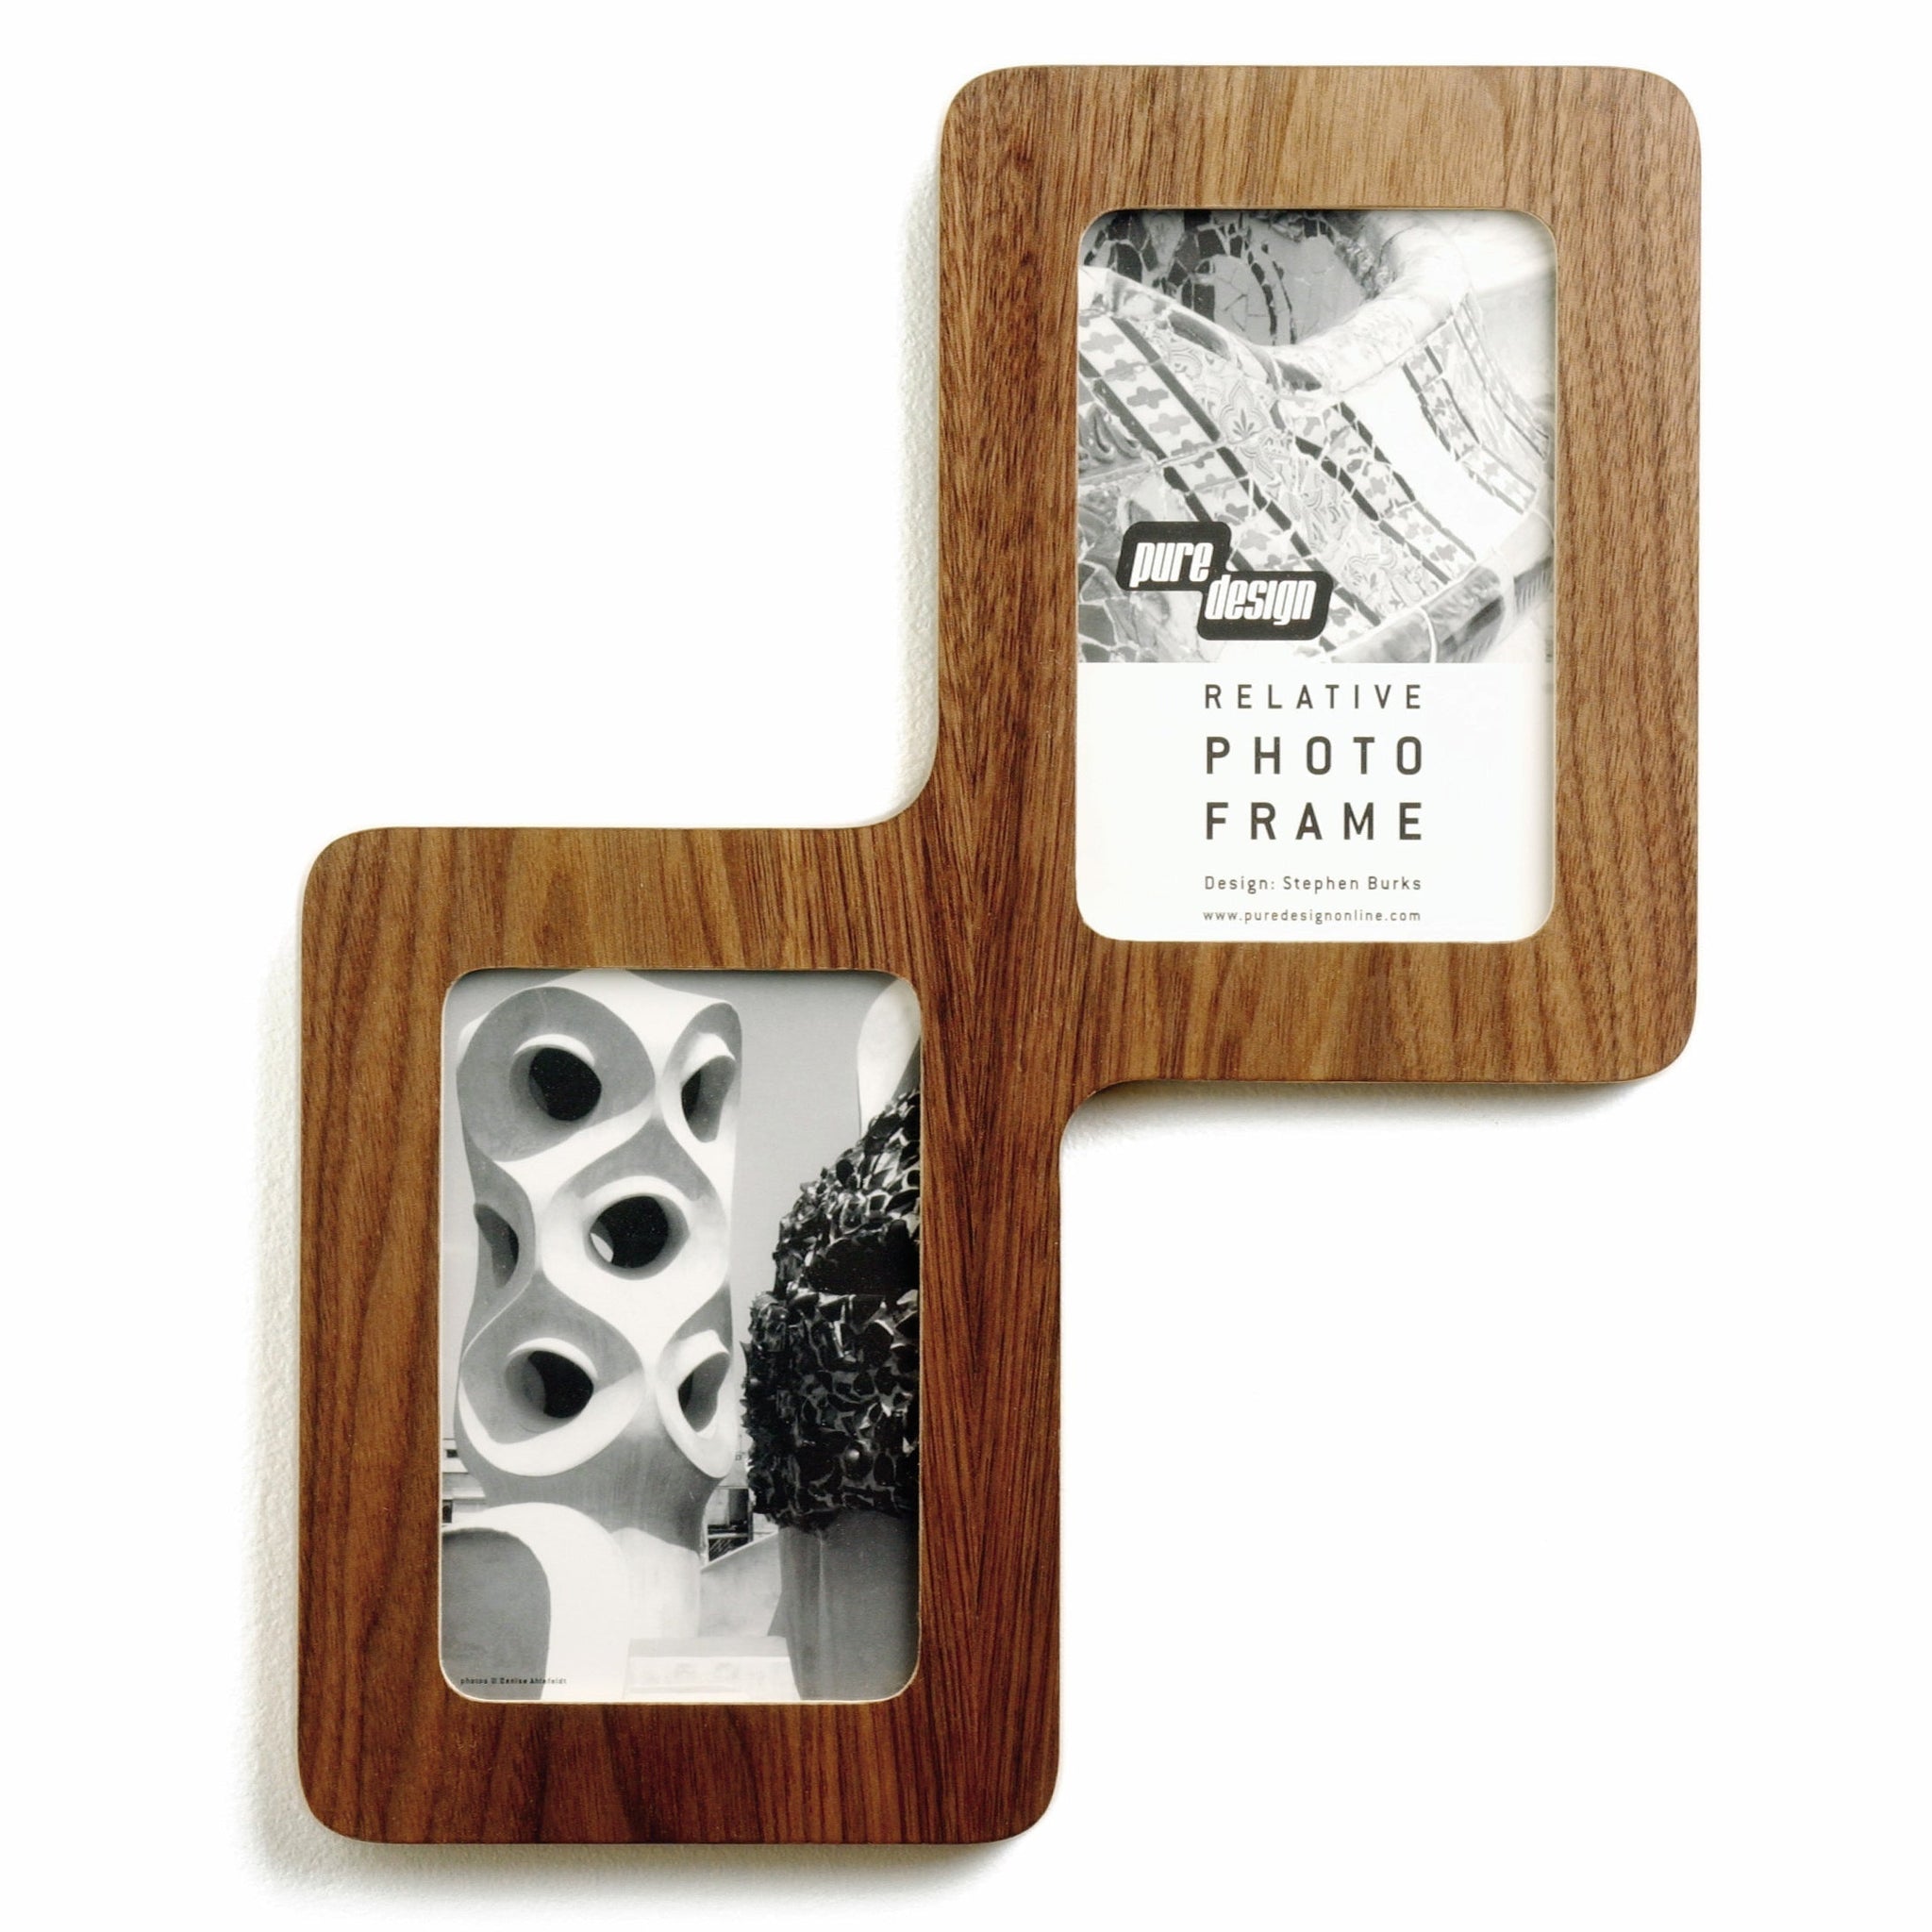 Archive (2001) // Relative Photo Frame by Stephen Burks for Pure Design